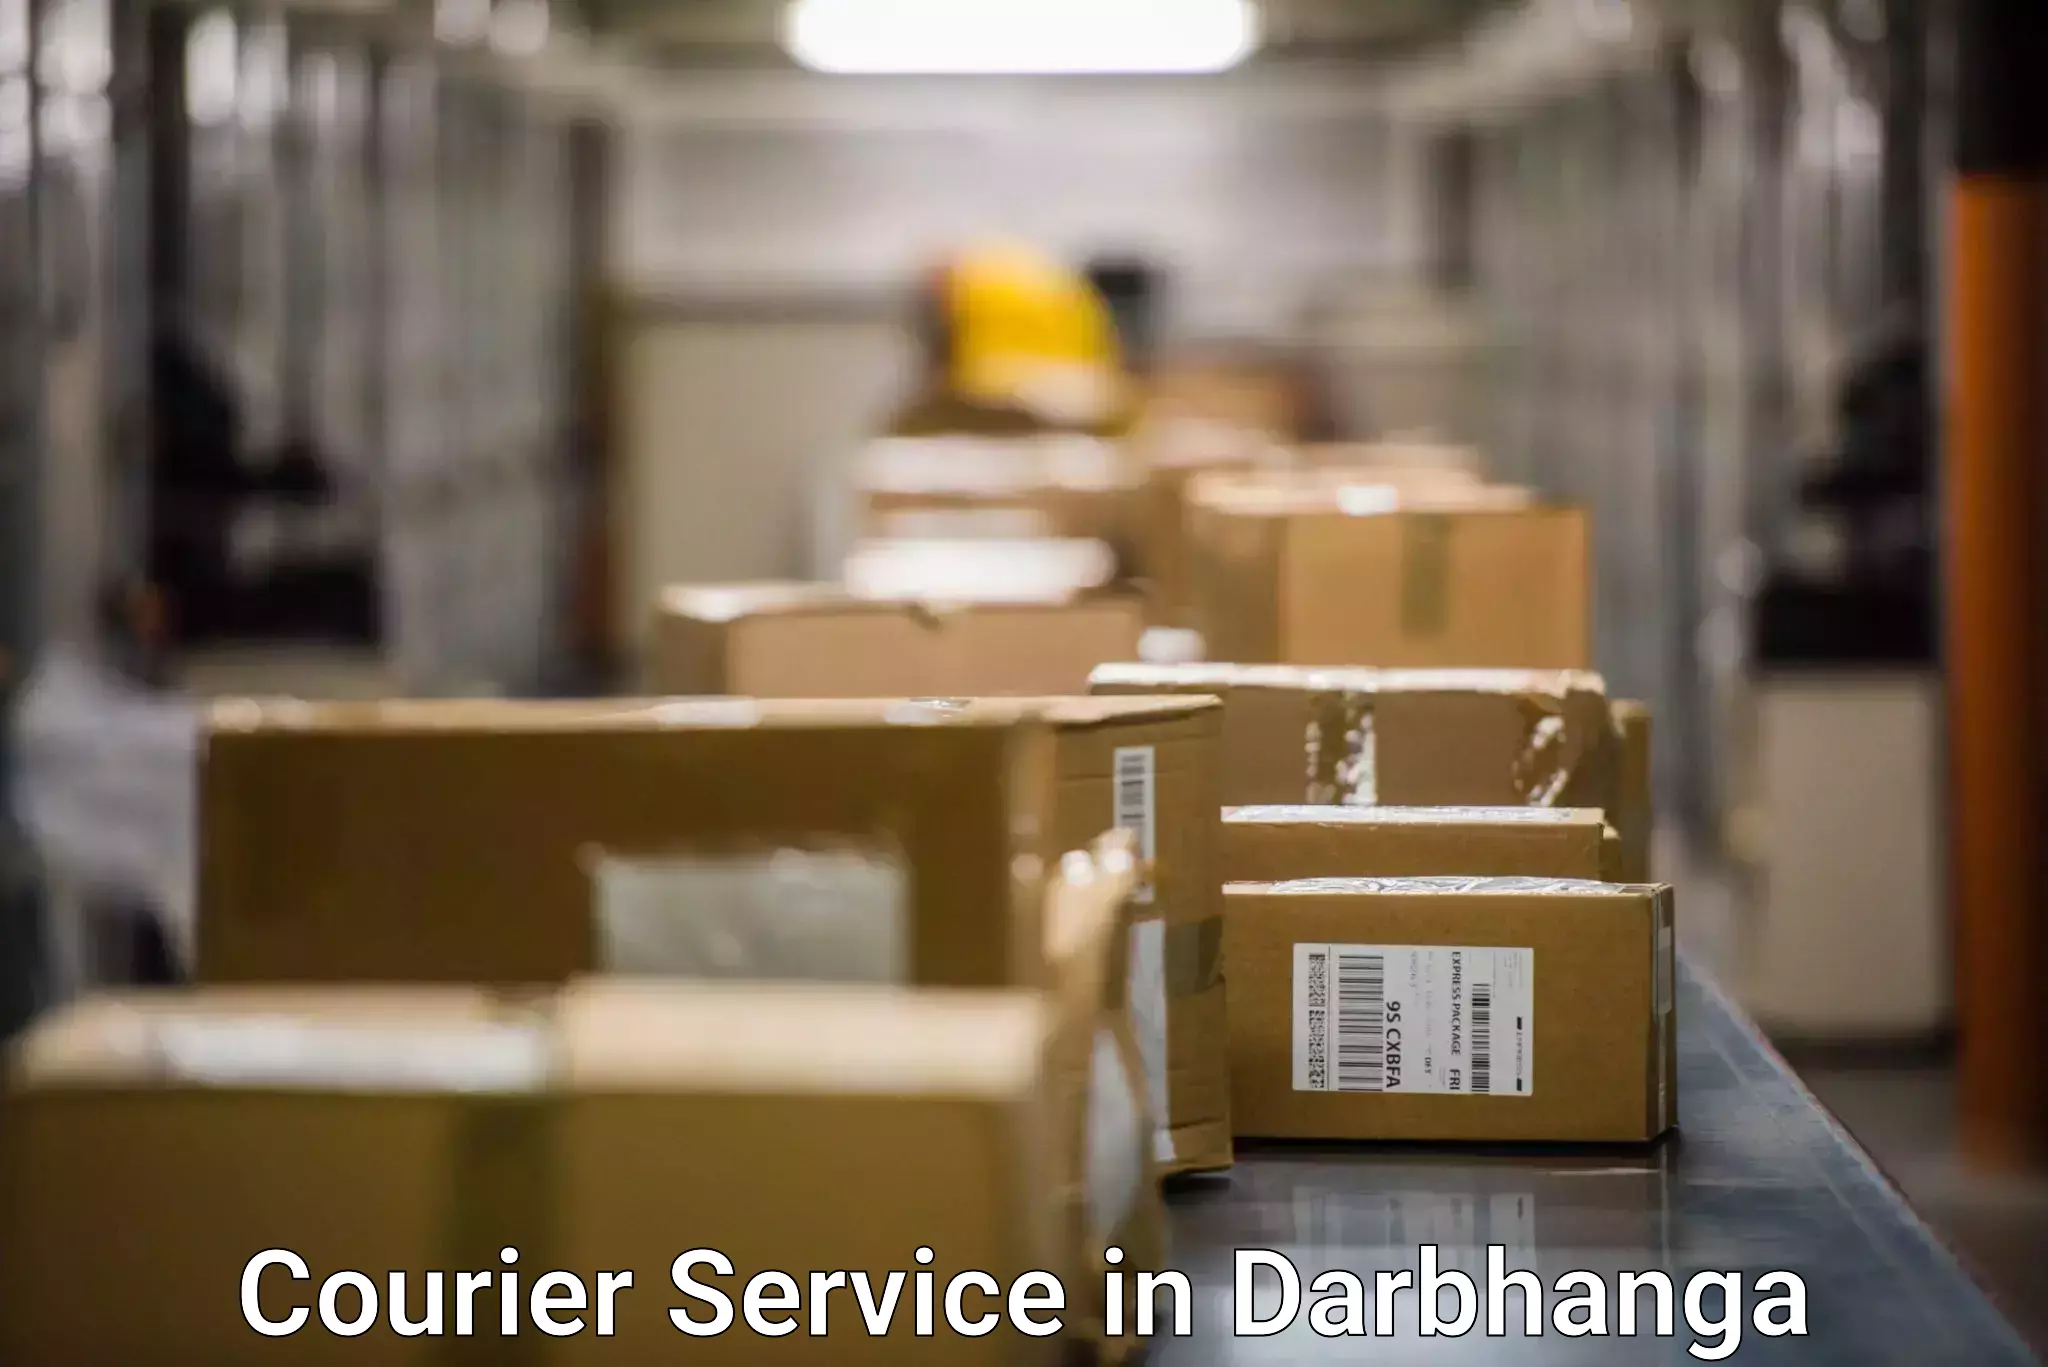 Customer-friendly courier services in Darbhanga